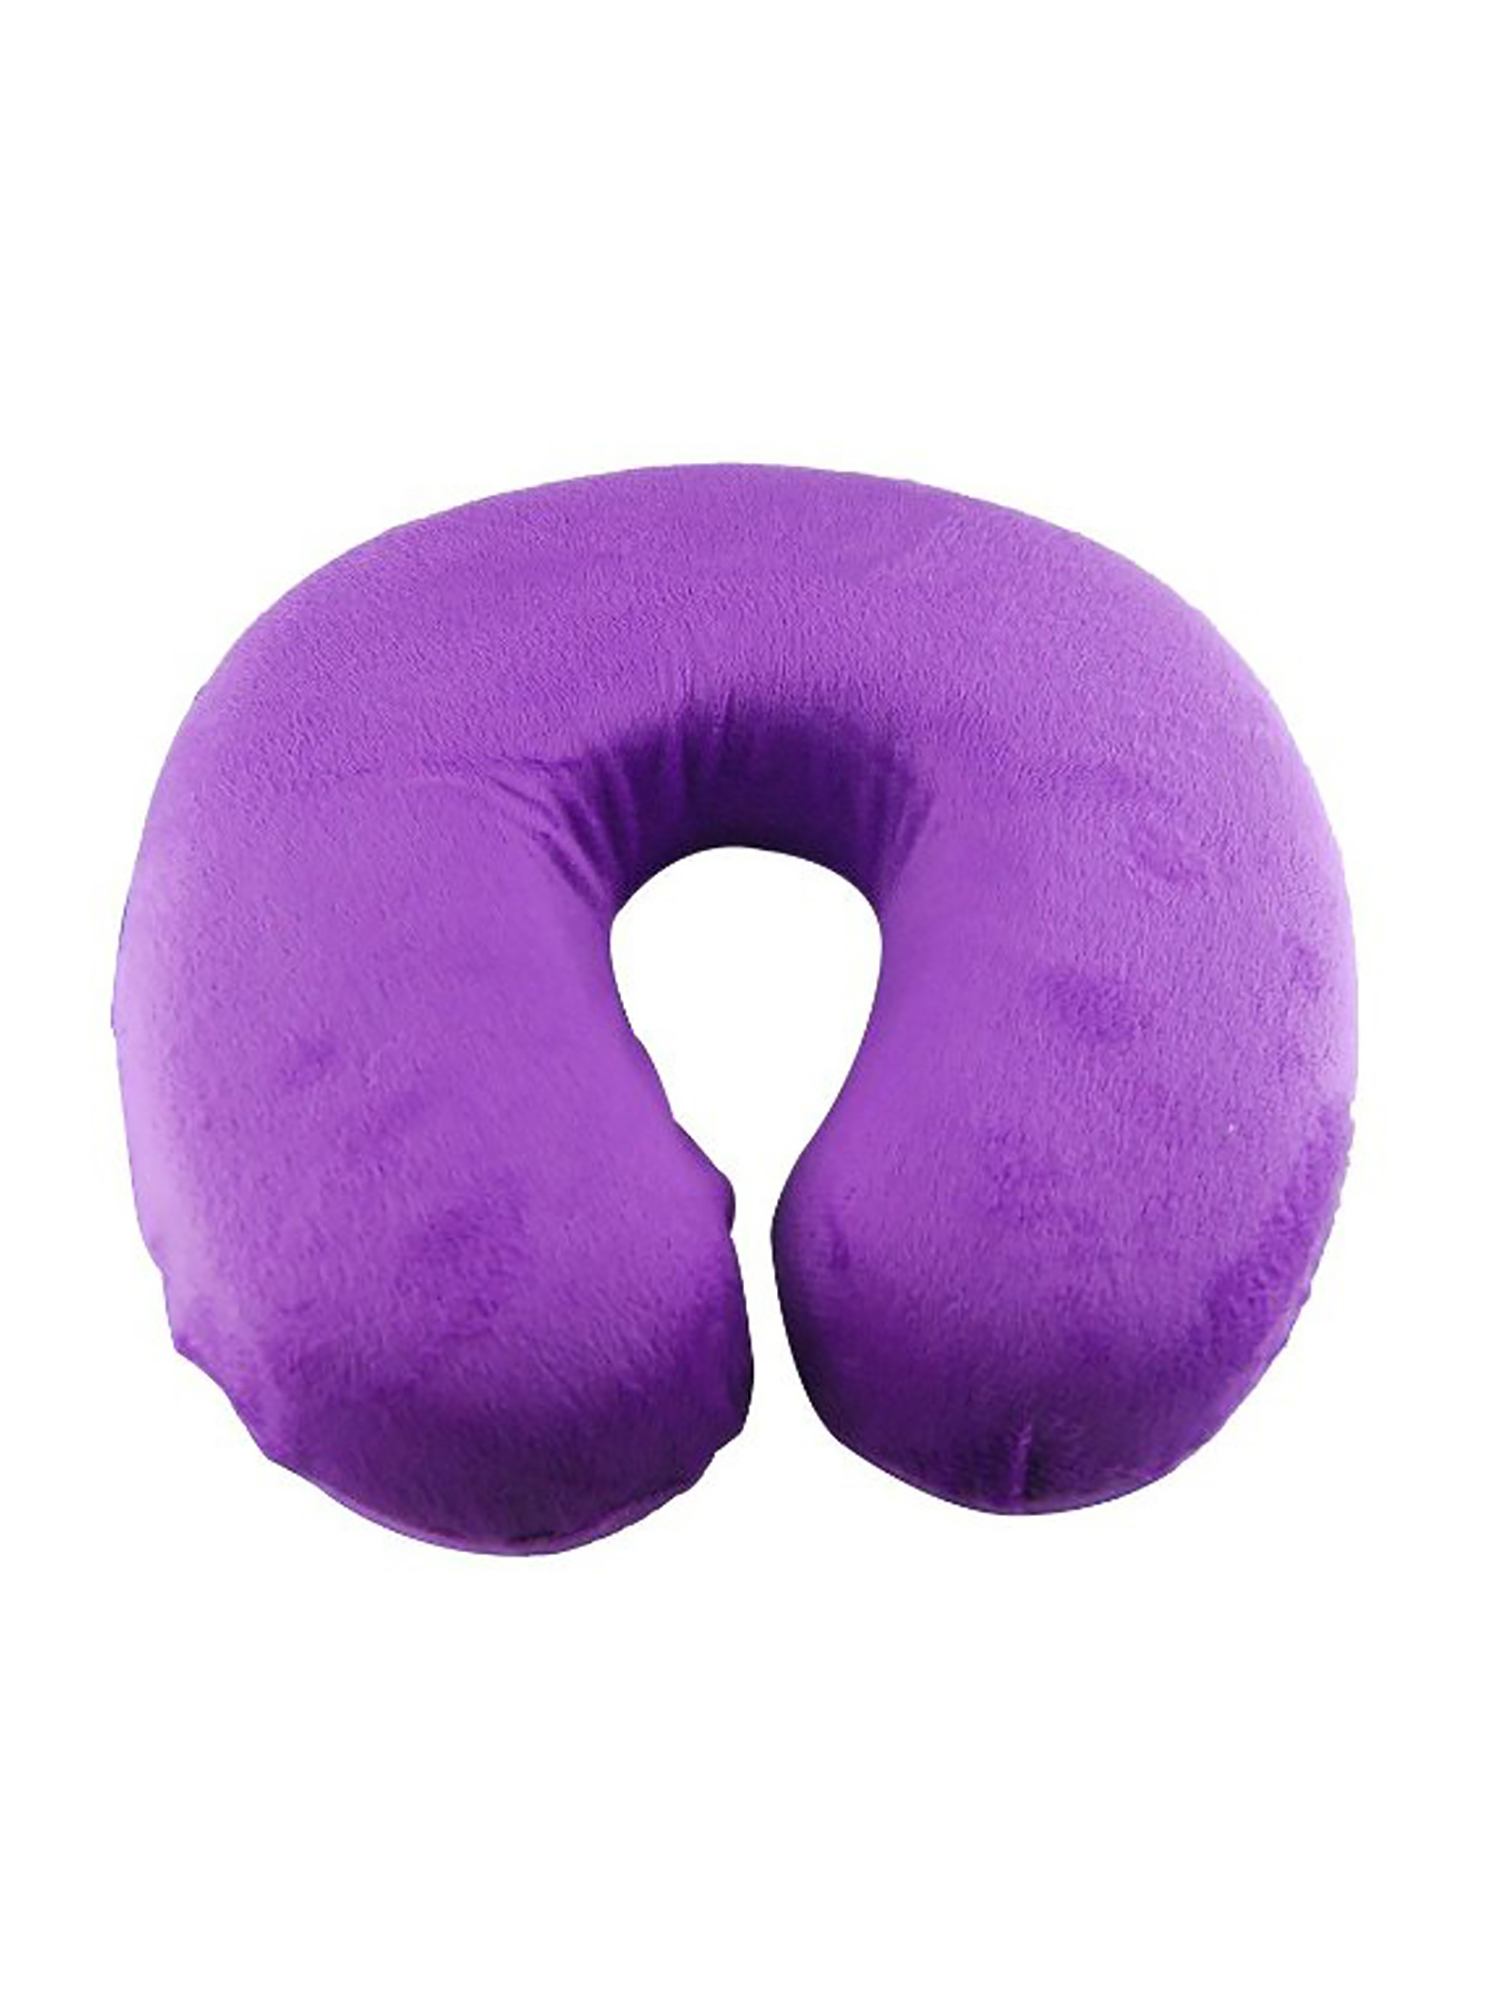 U Shape Memory Foam Neck Cushion Support Comfort Rest Outdoors Car Office Travel Pillow - Purple - image 2 of 4